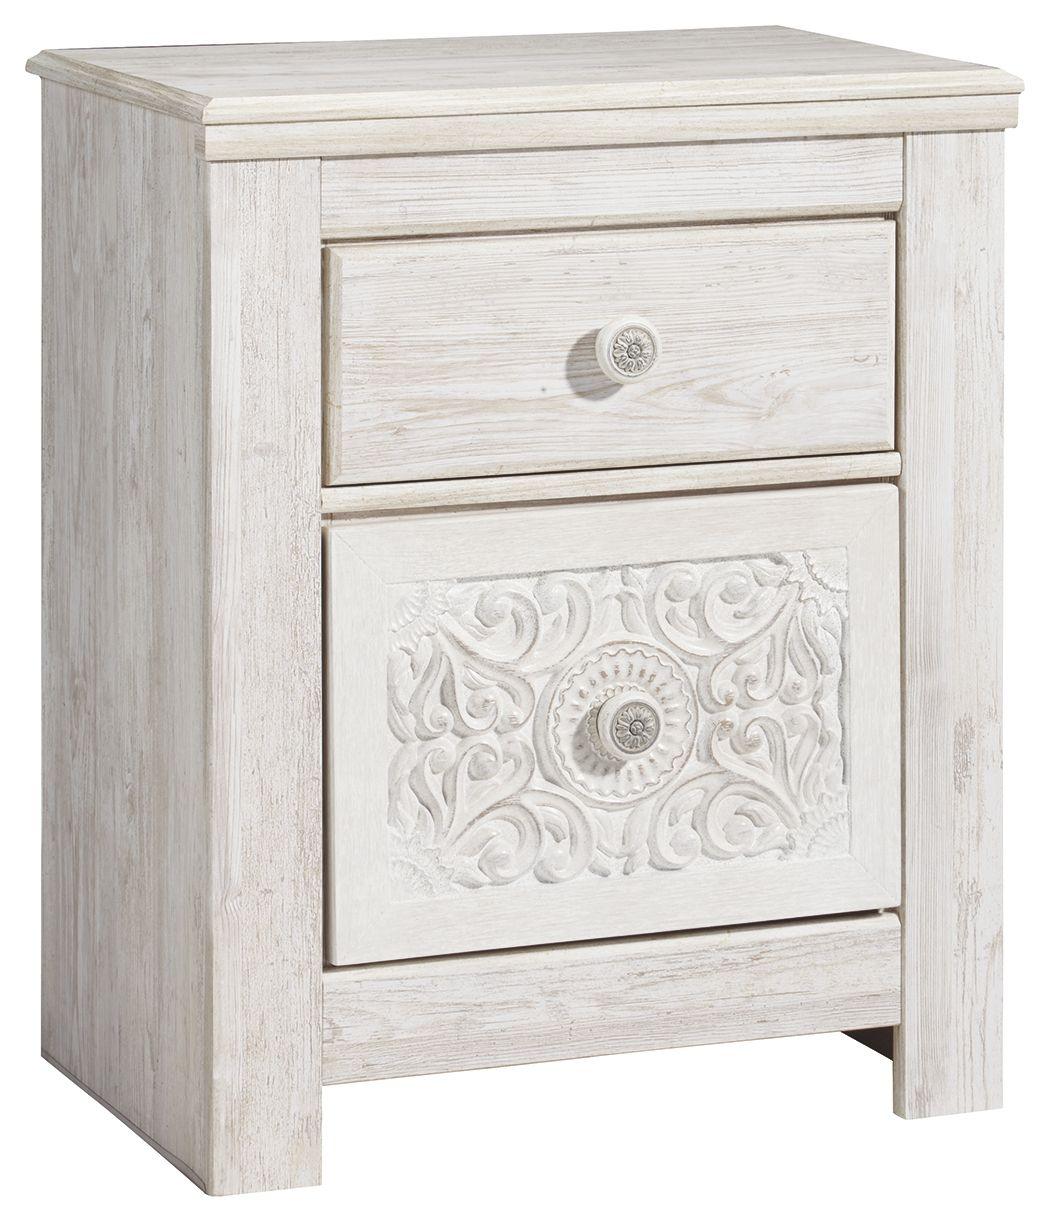 Paxberry - Whitewash - Two Drawer Night Stand Tony's Home Furnishings Furniture. Beds. Dressers. Sofas.